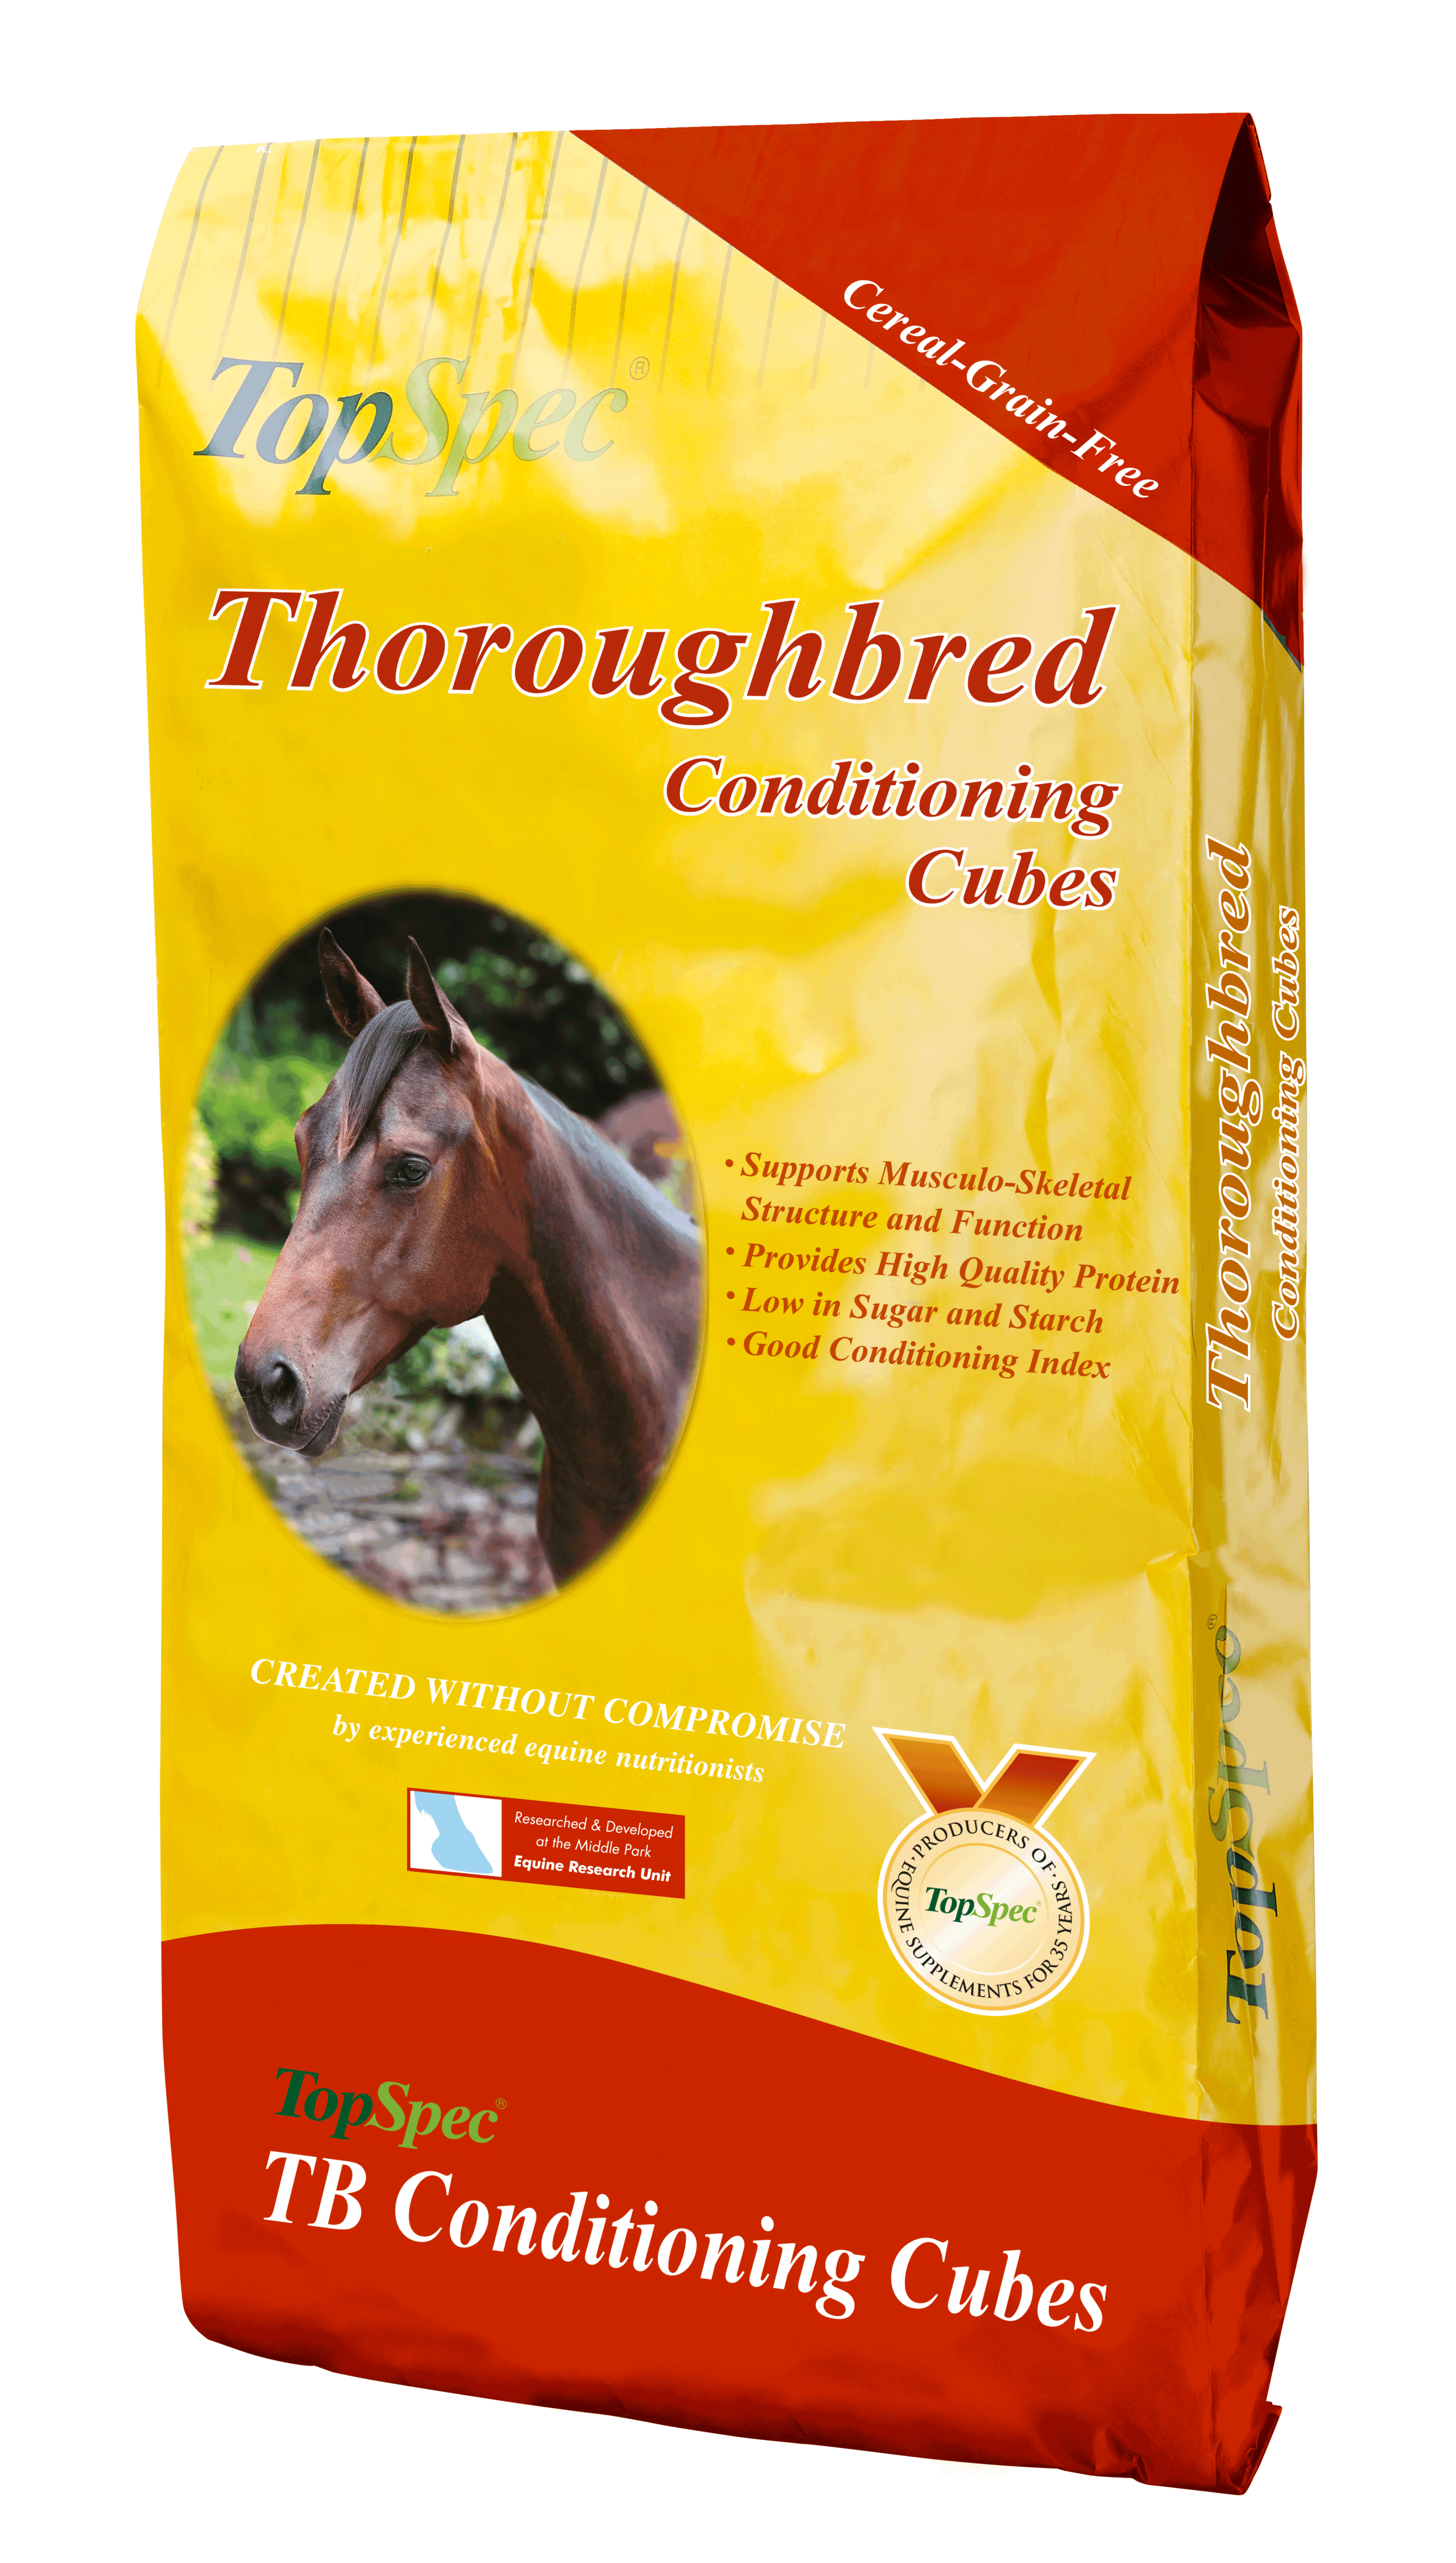 Thoroughbred Conditioning Cubes